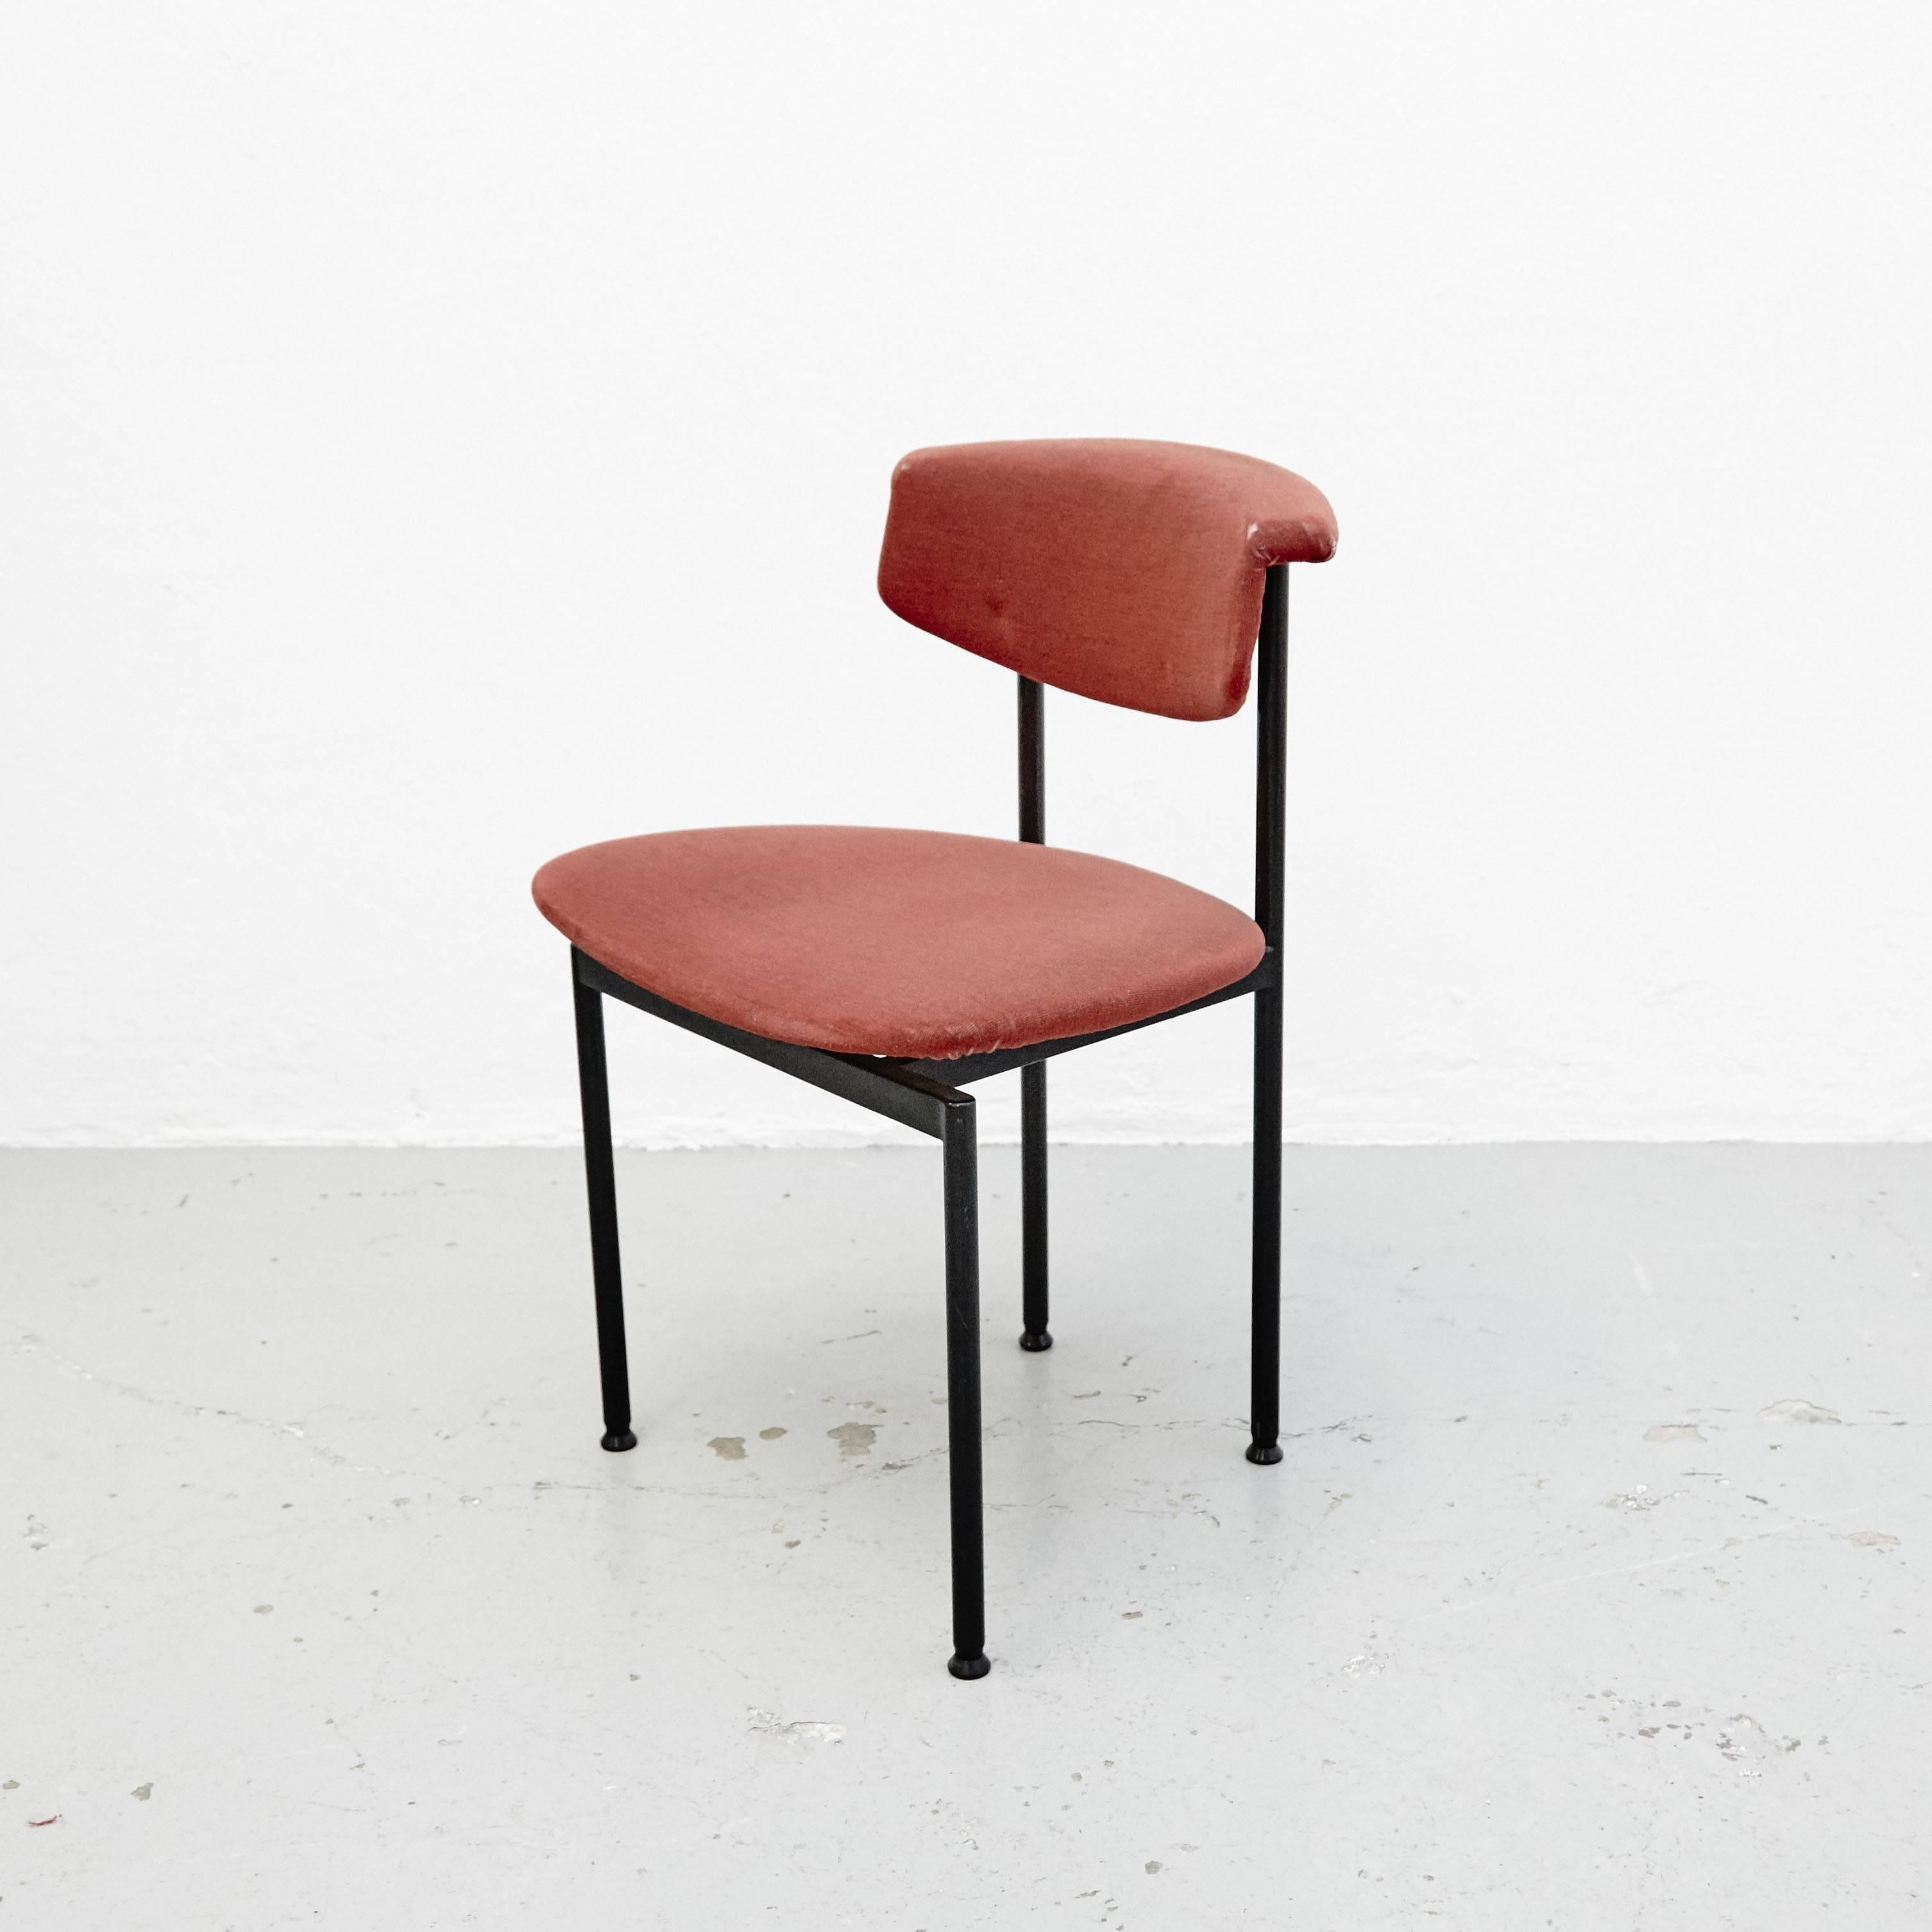 Set of eight dining chairs, model alpha from the Meander Serie, designed by Rudolf Wolf.
Manufactured by Meandre (Netherlands), circa 1960.
Steel structure, deep foam seat and backrest.

In original condition, with minor wear consistent with age